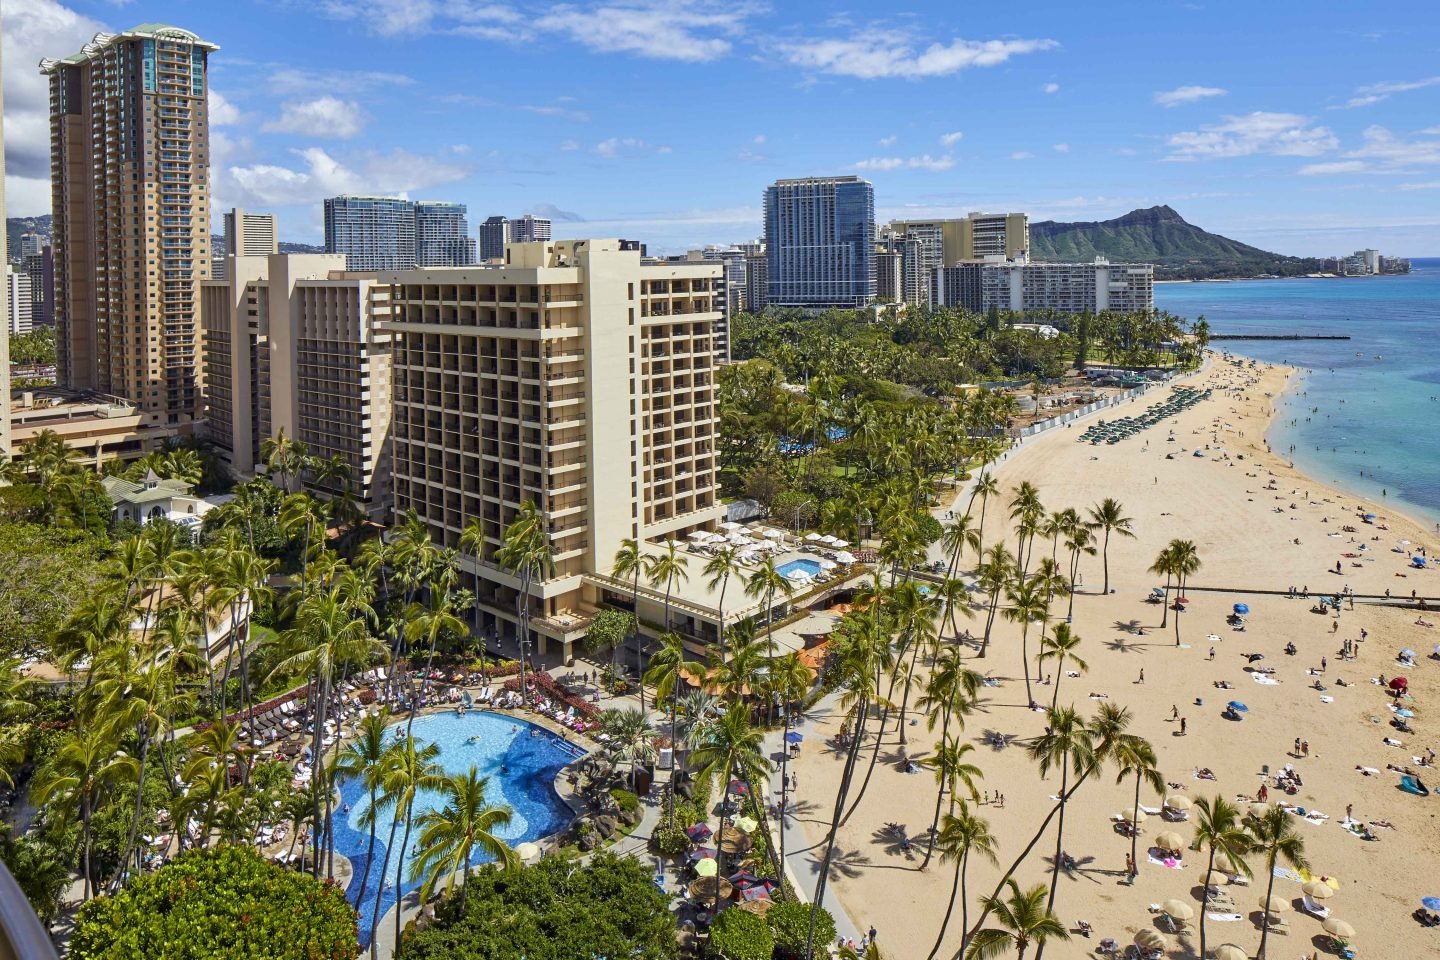 how expensive is trip to hawaii